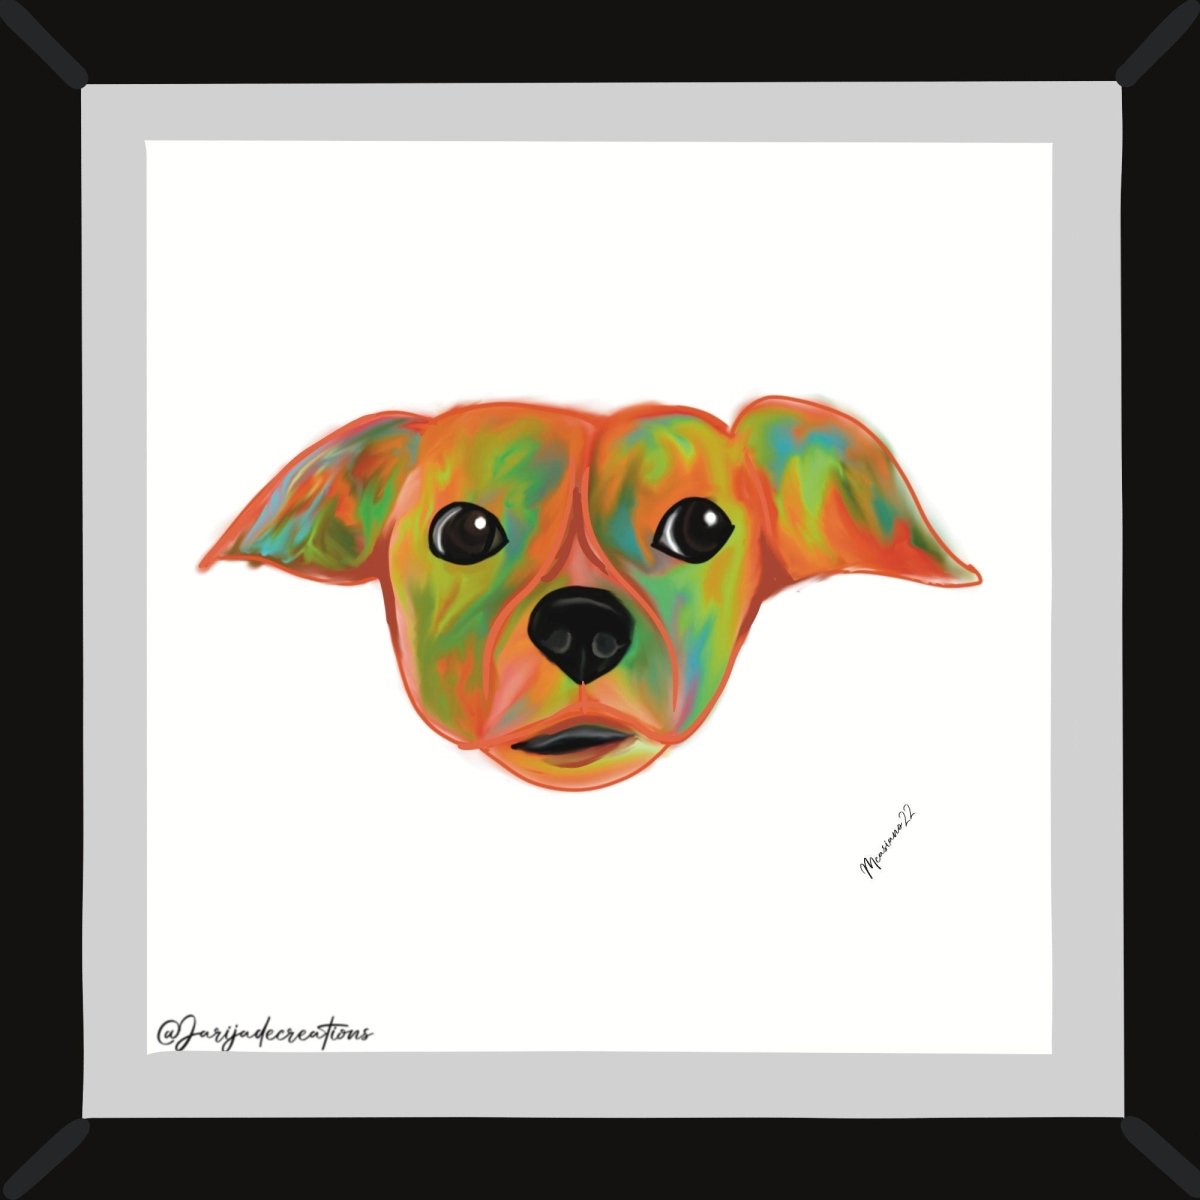 Dachshund Custom Pop Art portrait of from photo, Colorful wall art, Whimsical dog art illustrations, Personalized pet gift for dog owners - Jarijadecreations